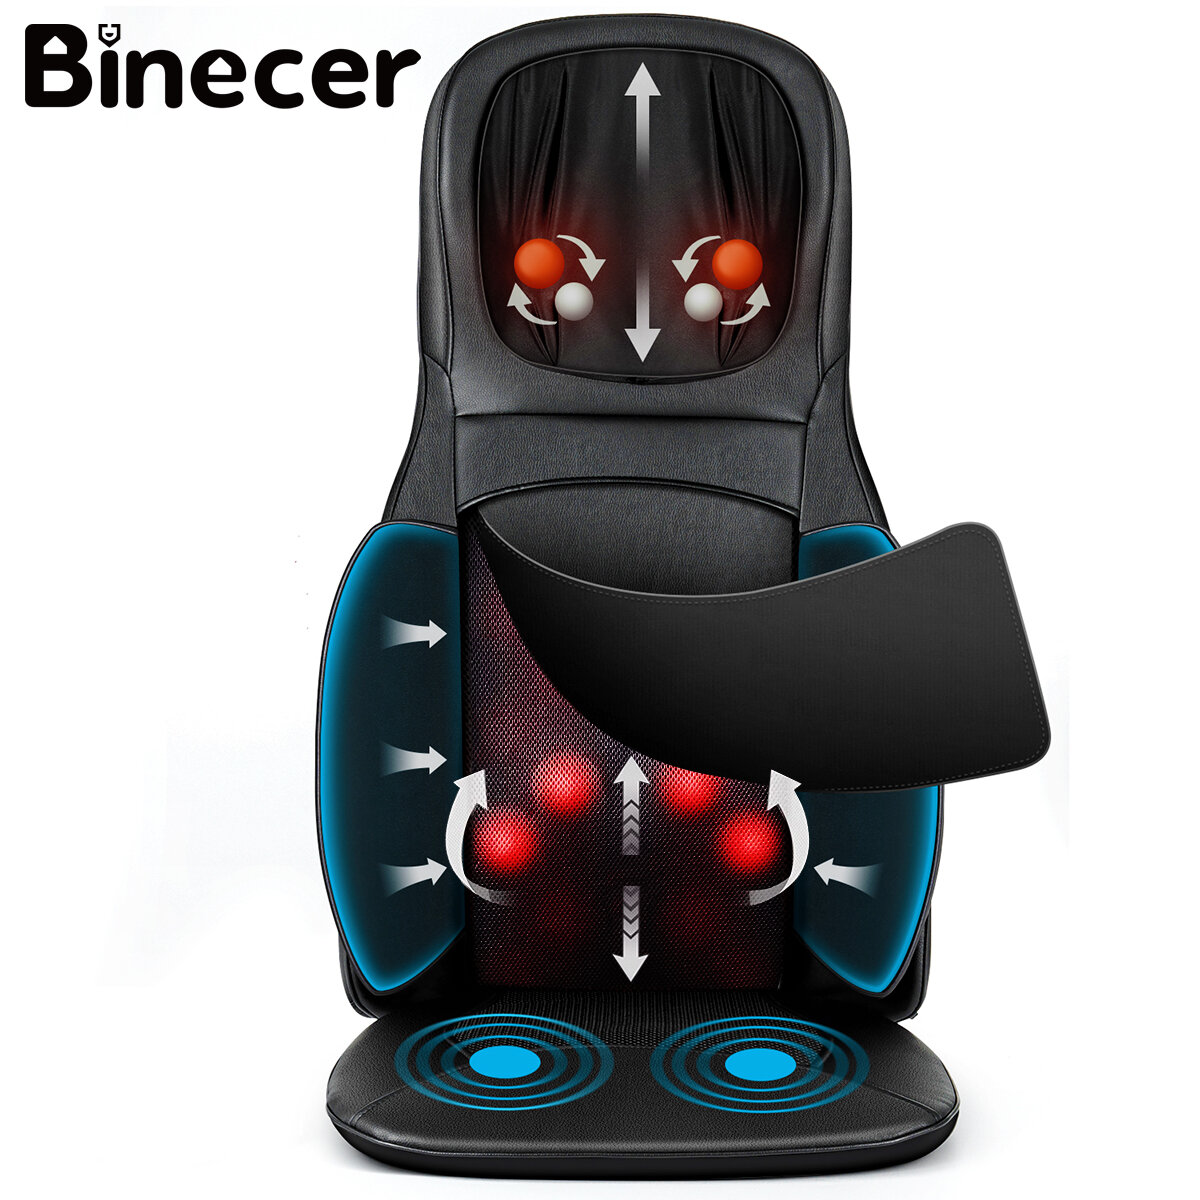 Binecer MP1.2 Neck And Back Massager With Heat Shiatsu Massage Chair Portable With Rolling Kneading Massage Cusion For Full Back Neck Shoulder